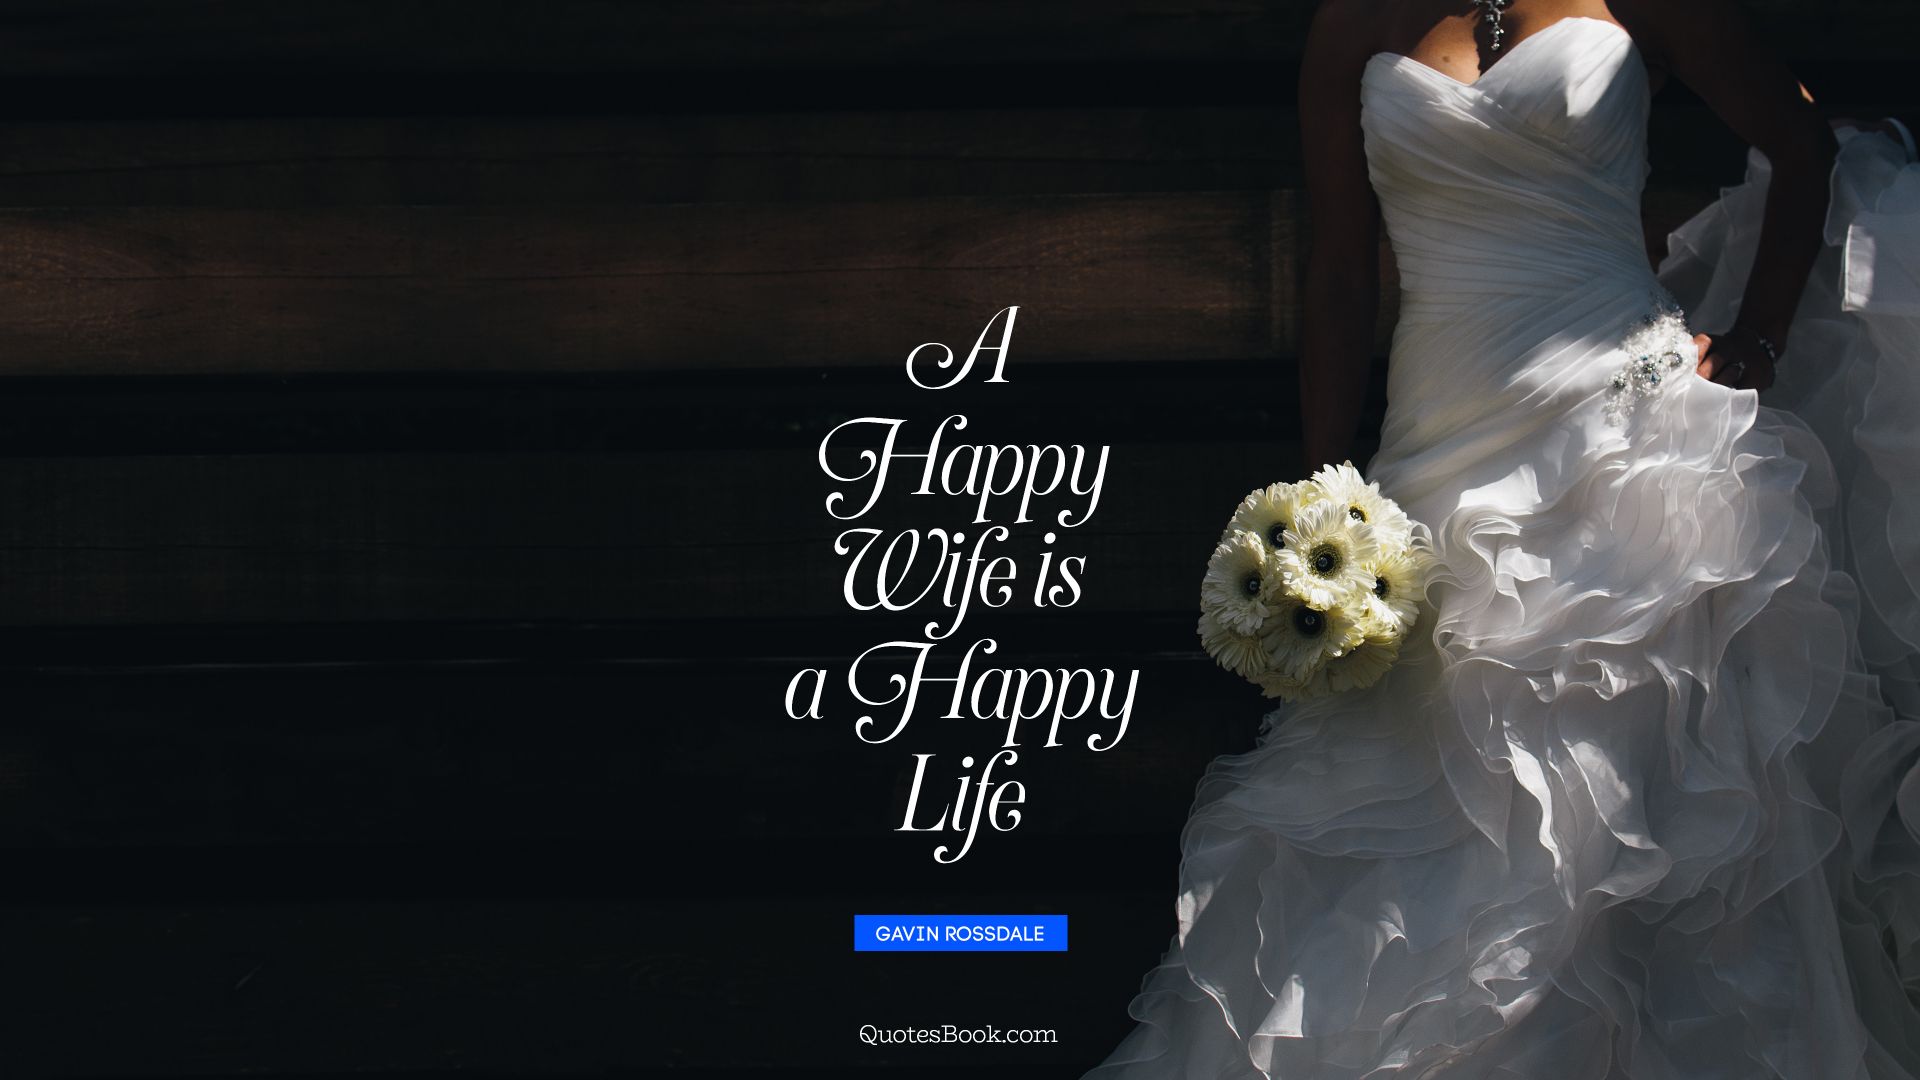 A happy wife is a happy life. - Quote by Gavin Rossdale